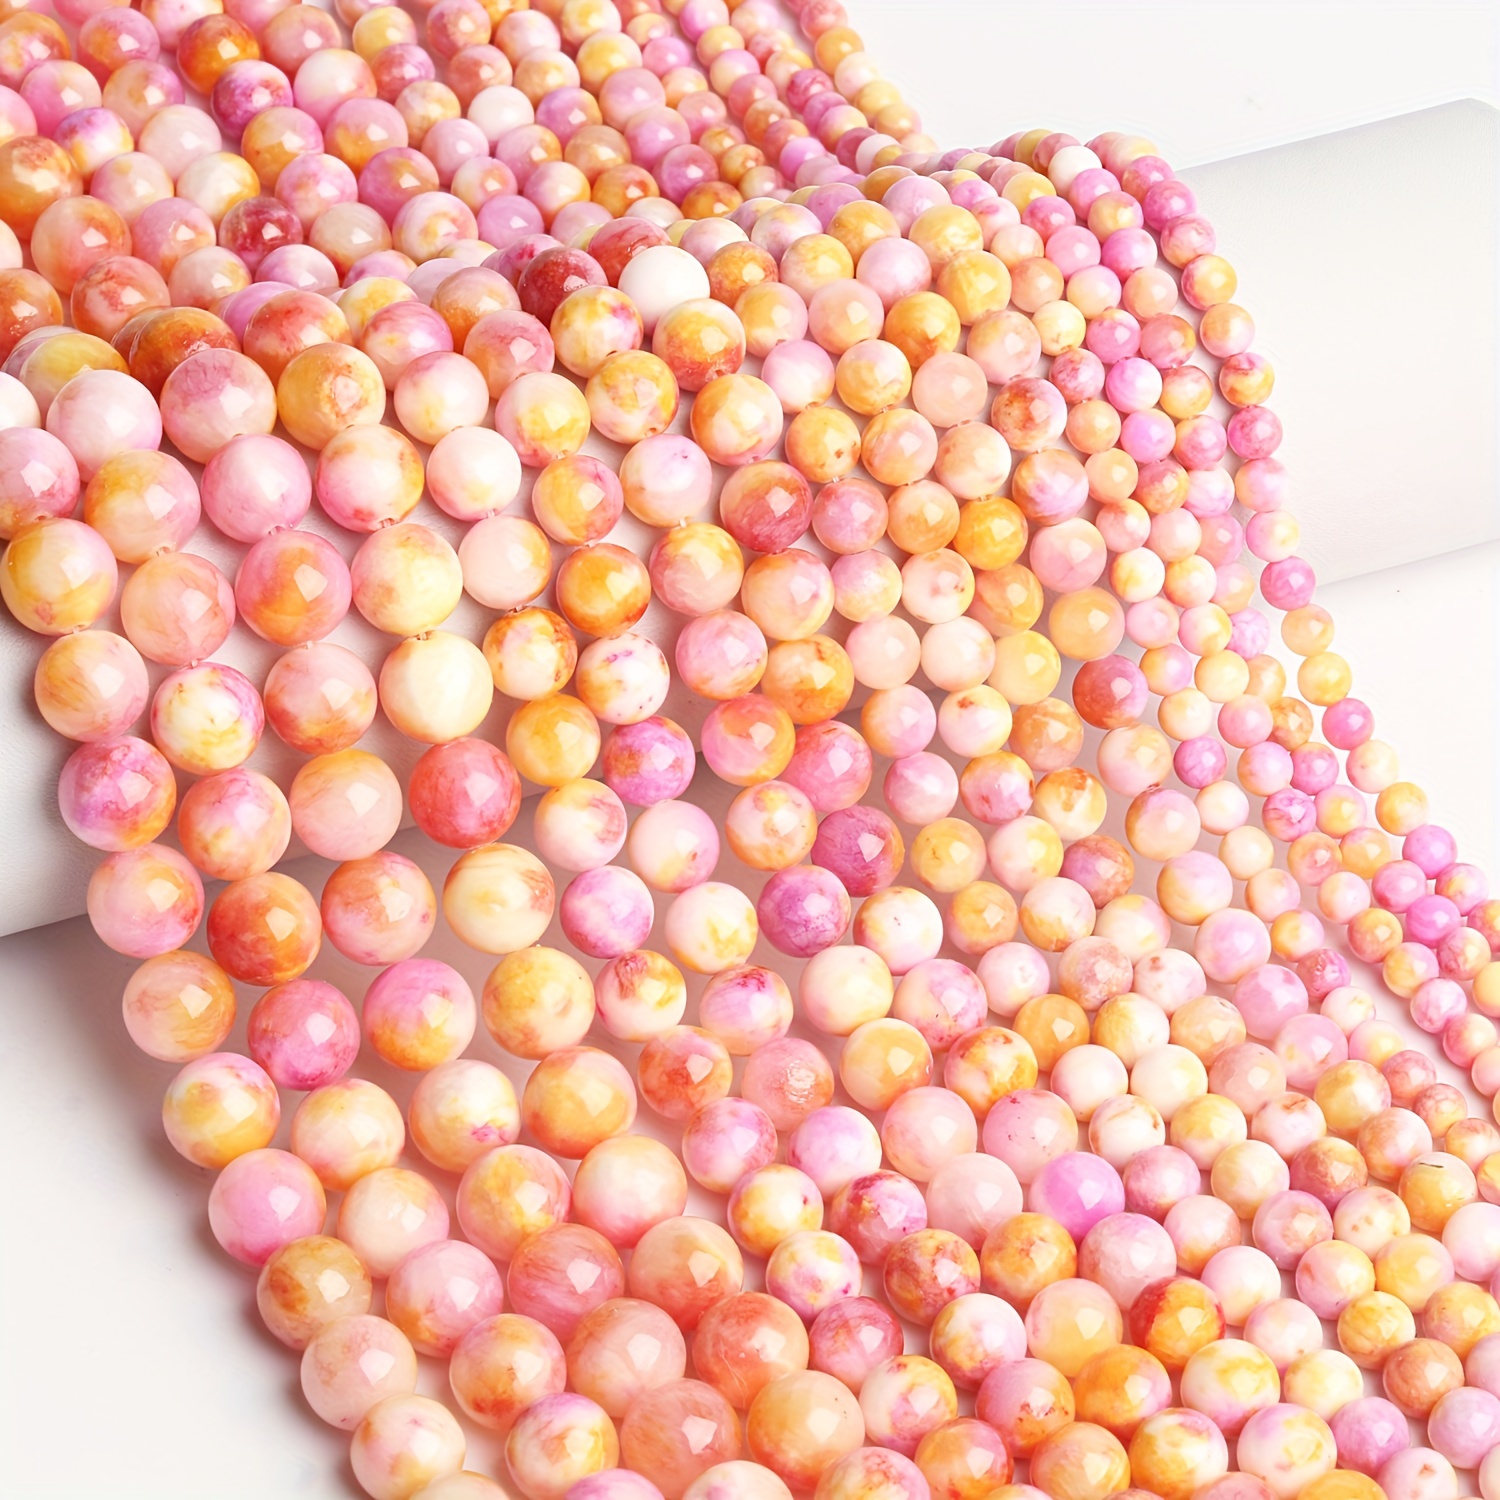 

1pc 6mm 8mm 10mm 12mm Round Orange&pink&white Persian Jade Stone Loose Spacer Beads Fashion For Handmade Diy Bracelet Necklace Jewelry Making Craft Supplies